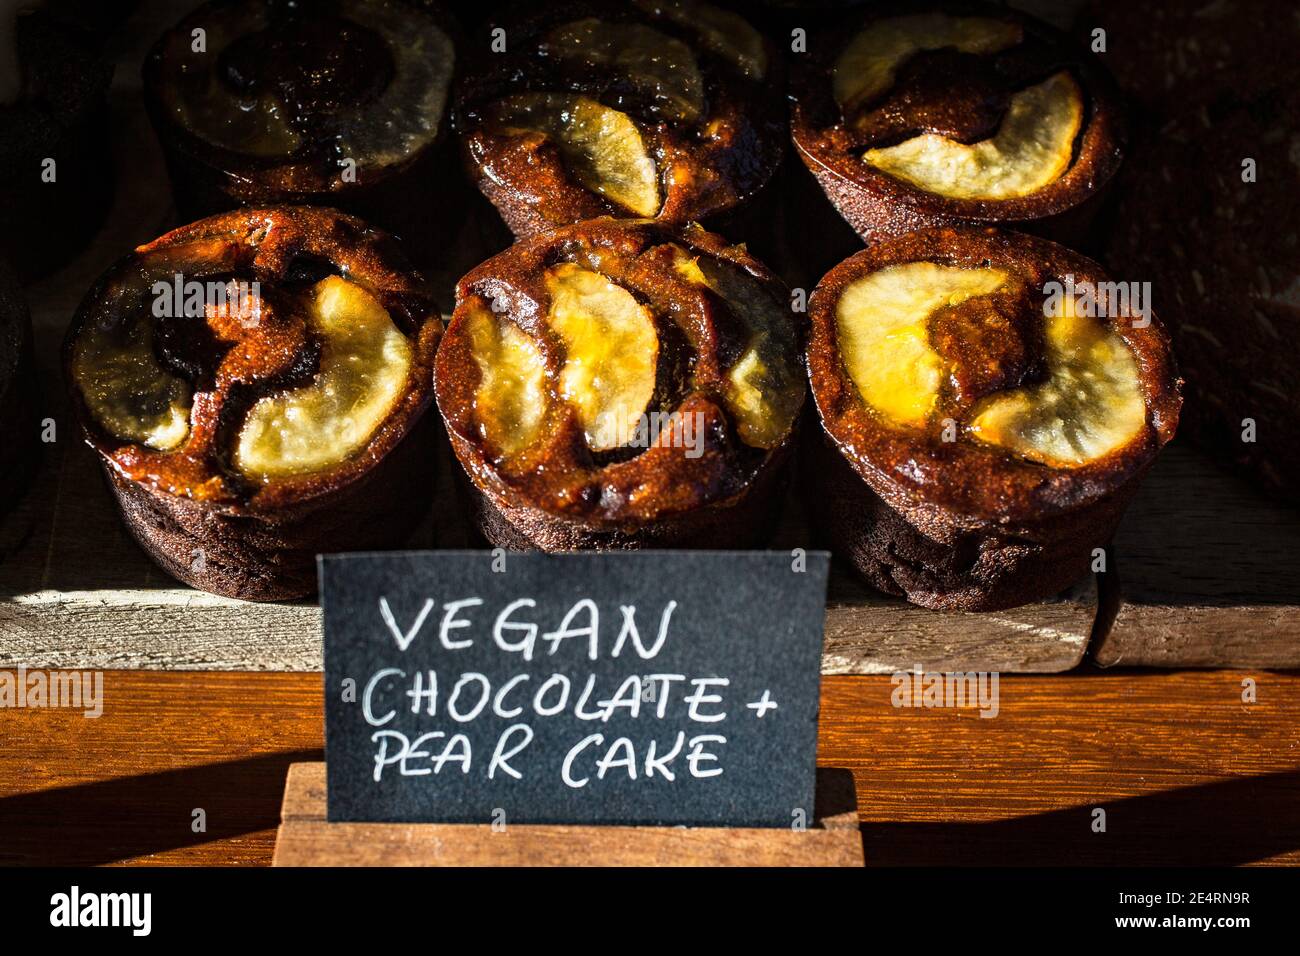 healthy vegan pear cake with chocolate. Clean eating Stock Photo